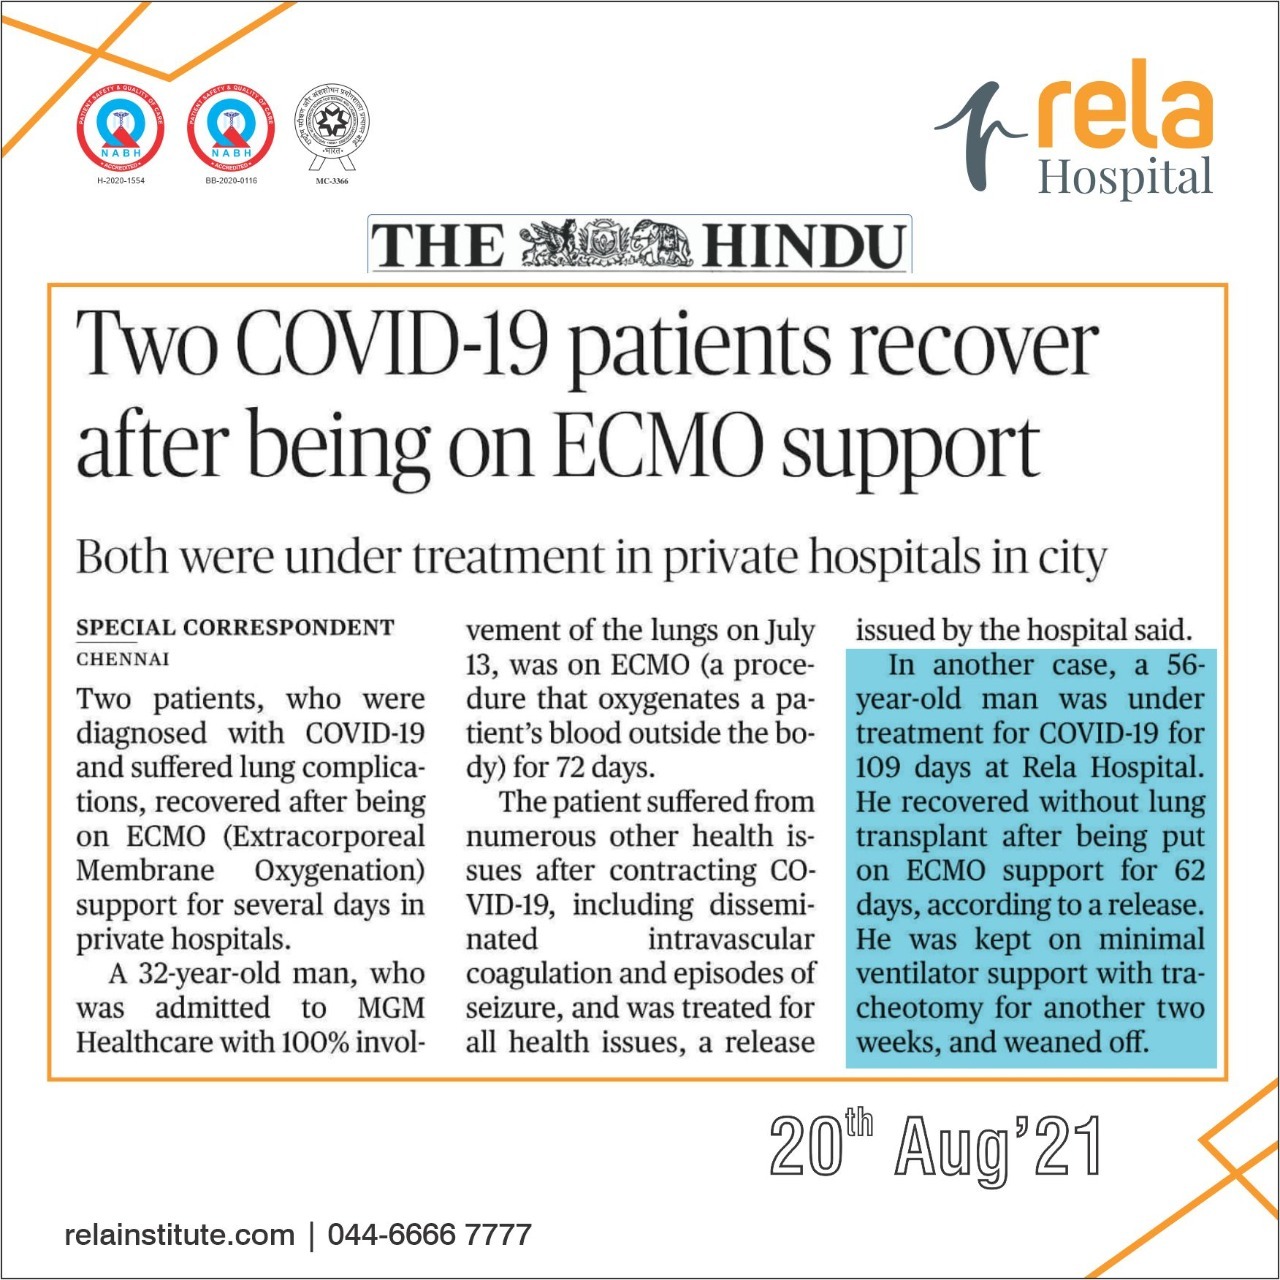 India's Longest Surviving Covid Patient On ECMO And Ventilator For A Record 109 Days, Recovers Without Lung Transplant